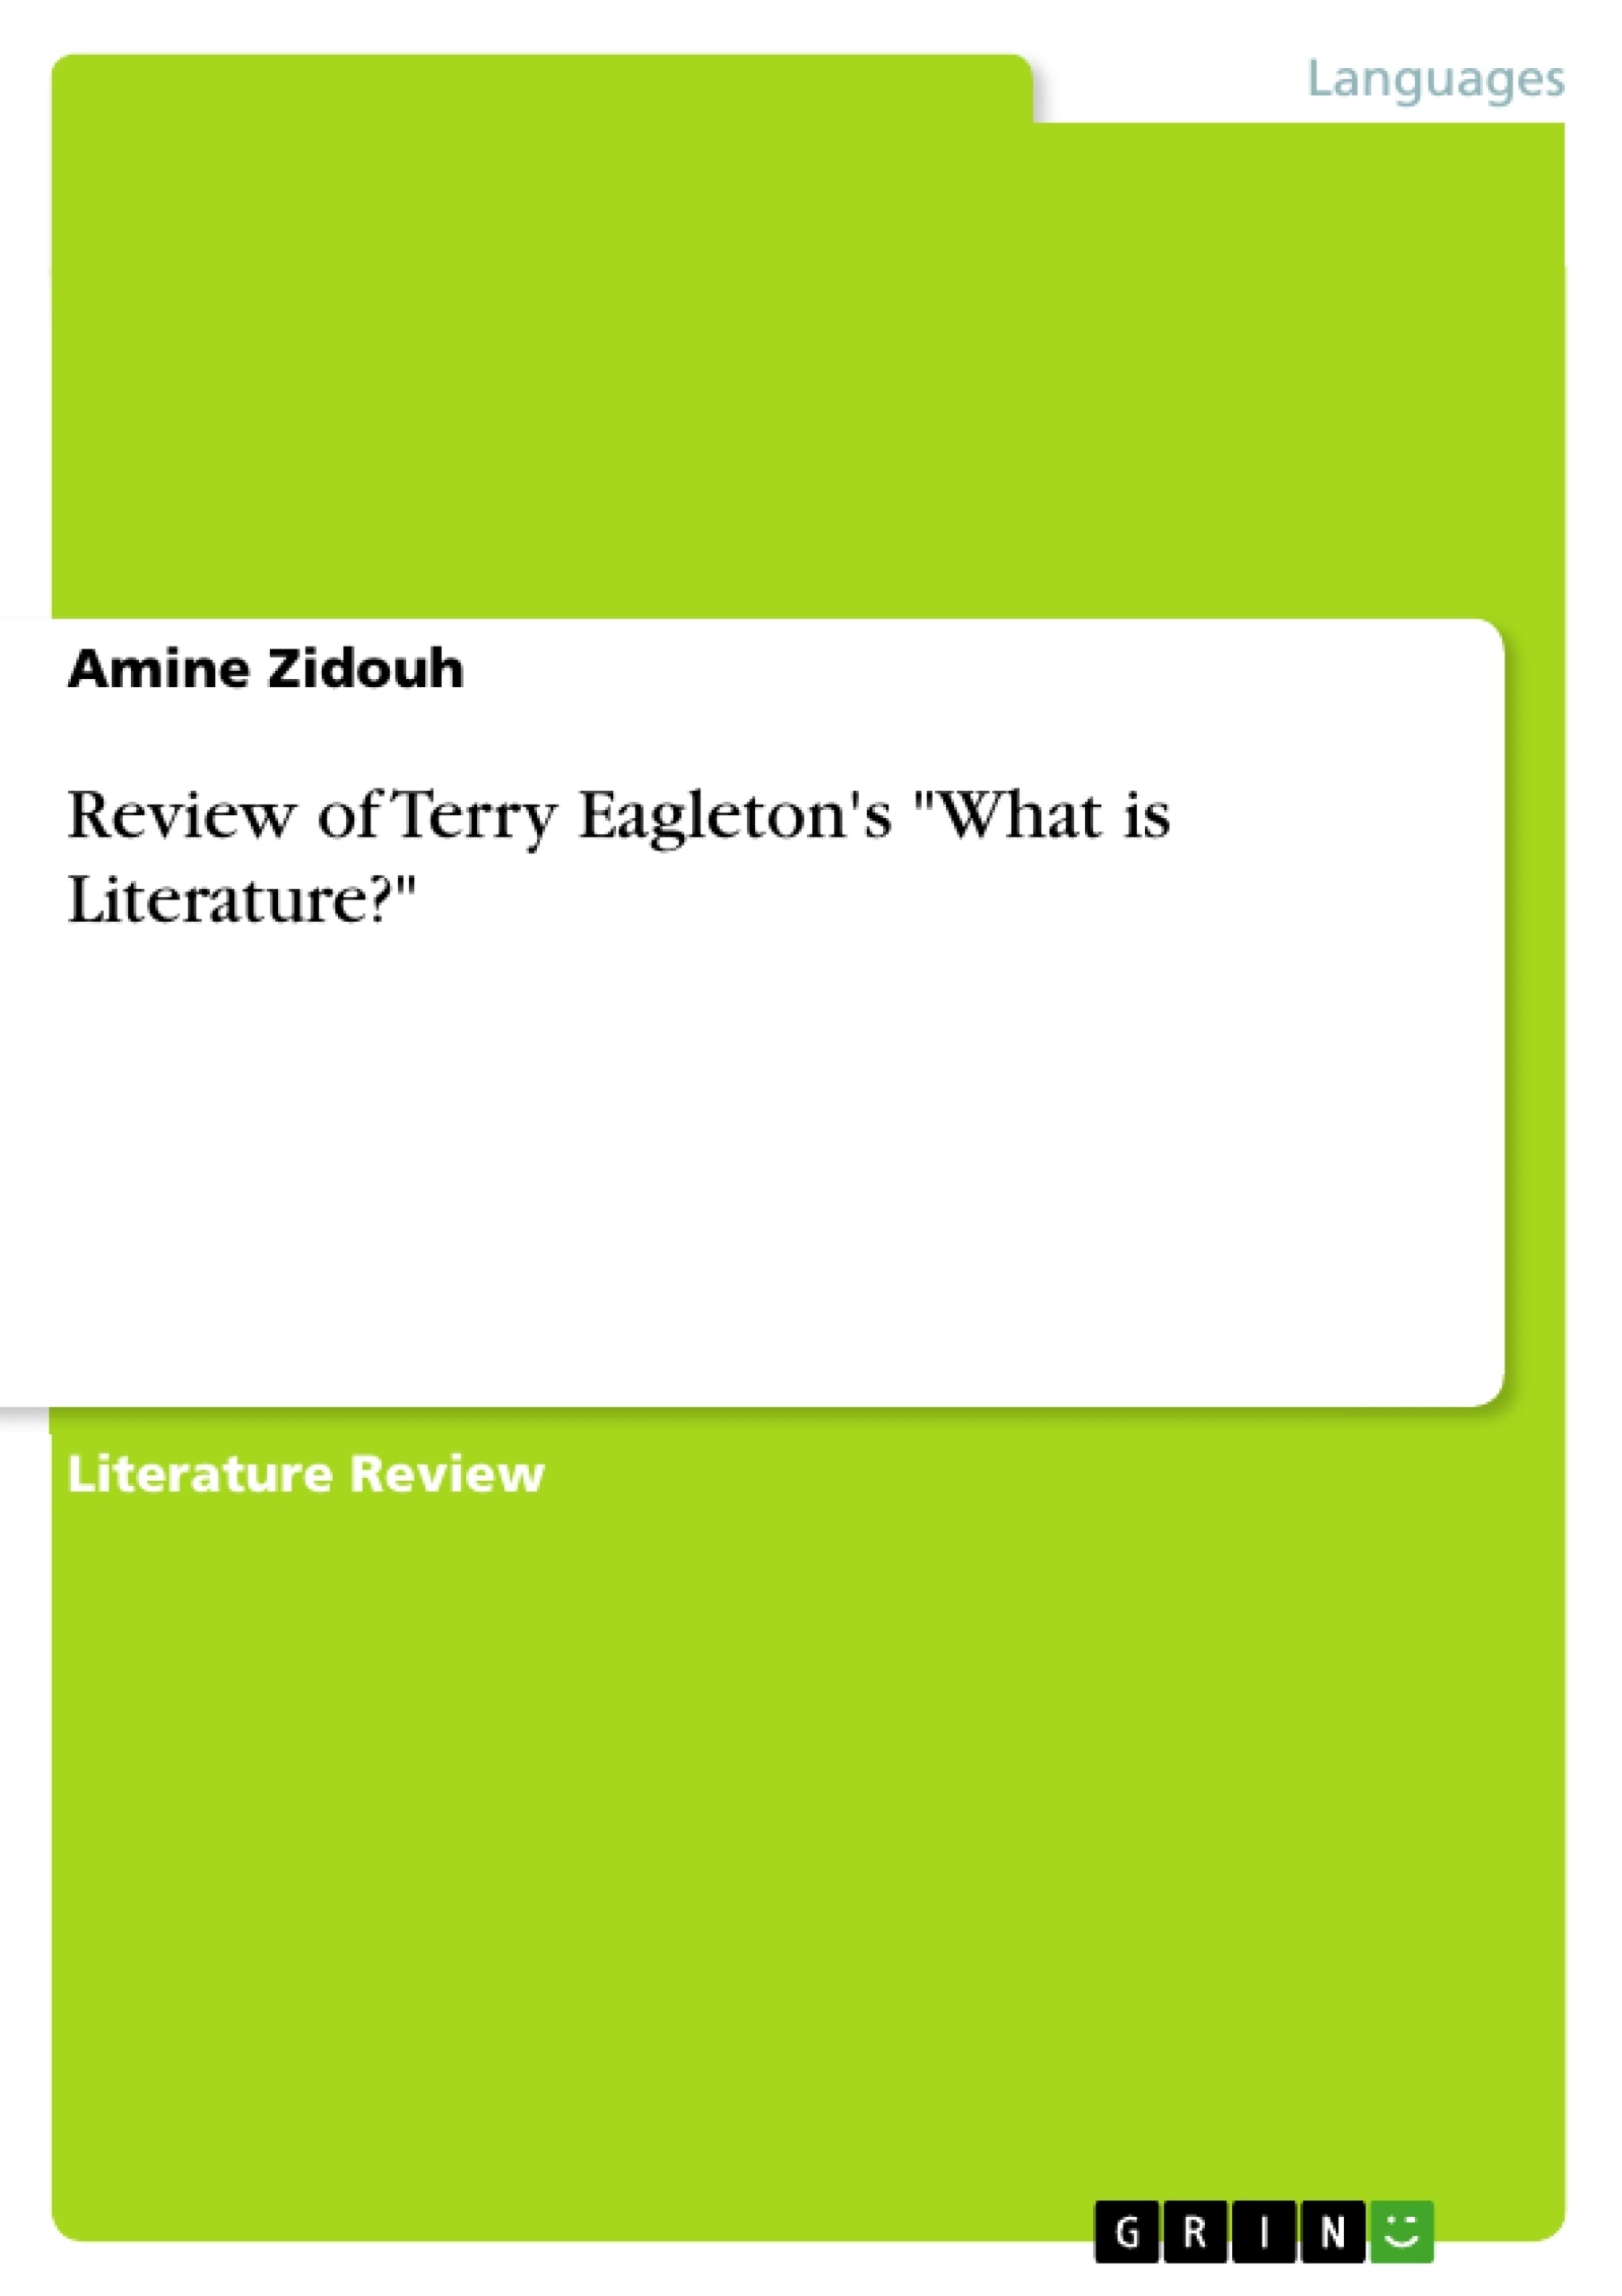 Title: Review of Terry Eagleton's "What is Literature?"